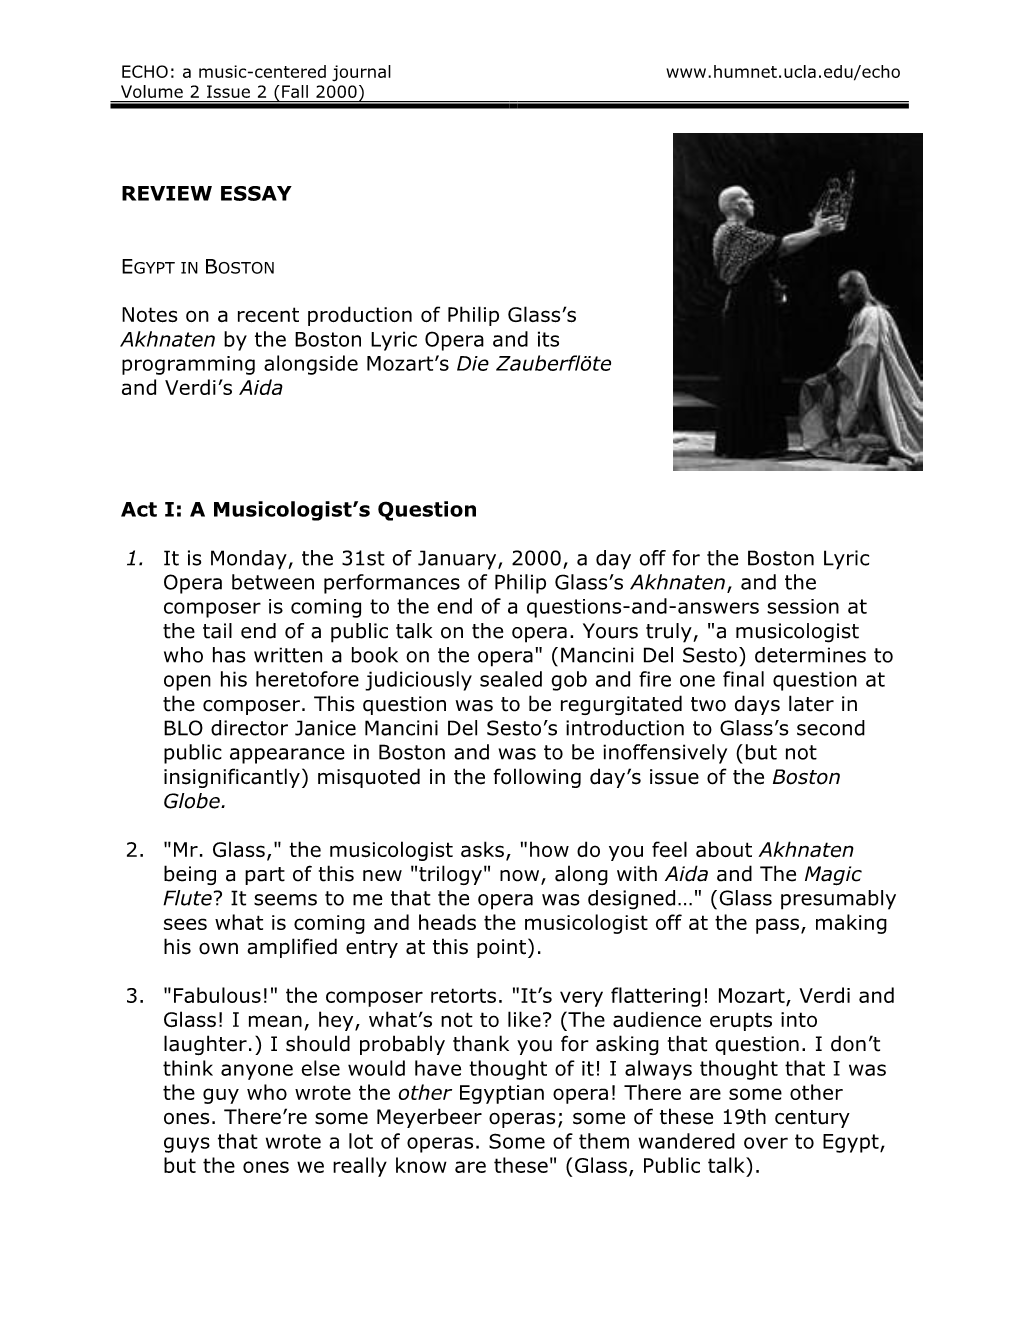 REVIEW ESSAY Notes on a Recent Production of Philip Glass's